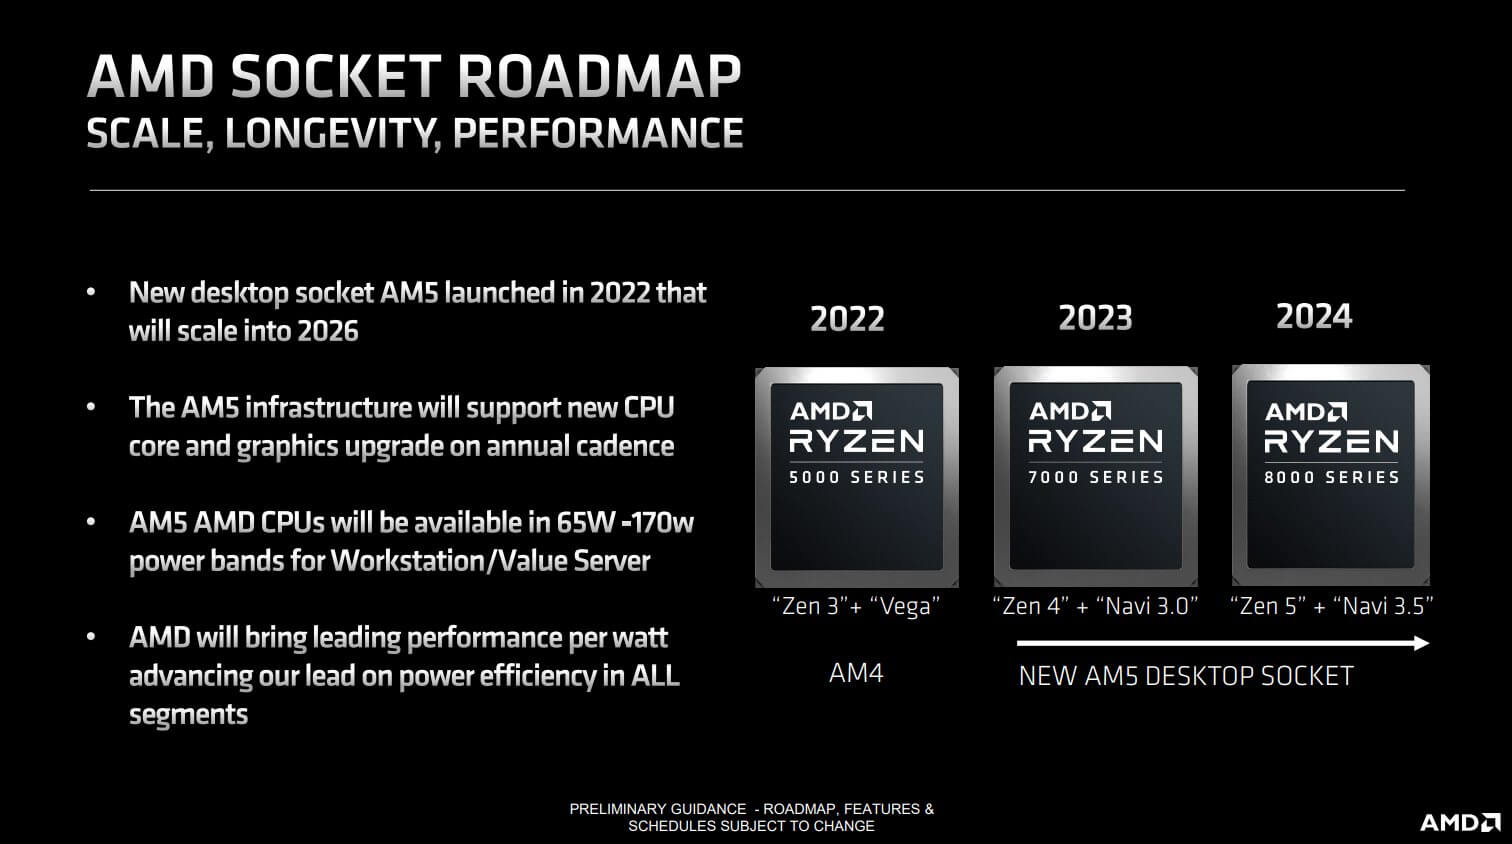 AMD Ryzen 7 8700X and Strix Point Spotted Hybrid CPU with 8P and 8E